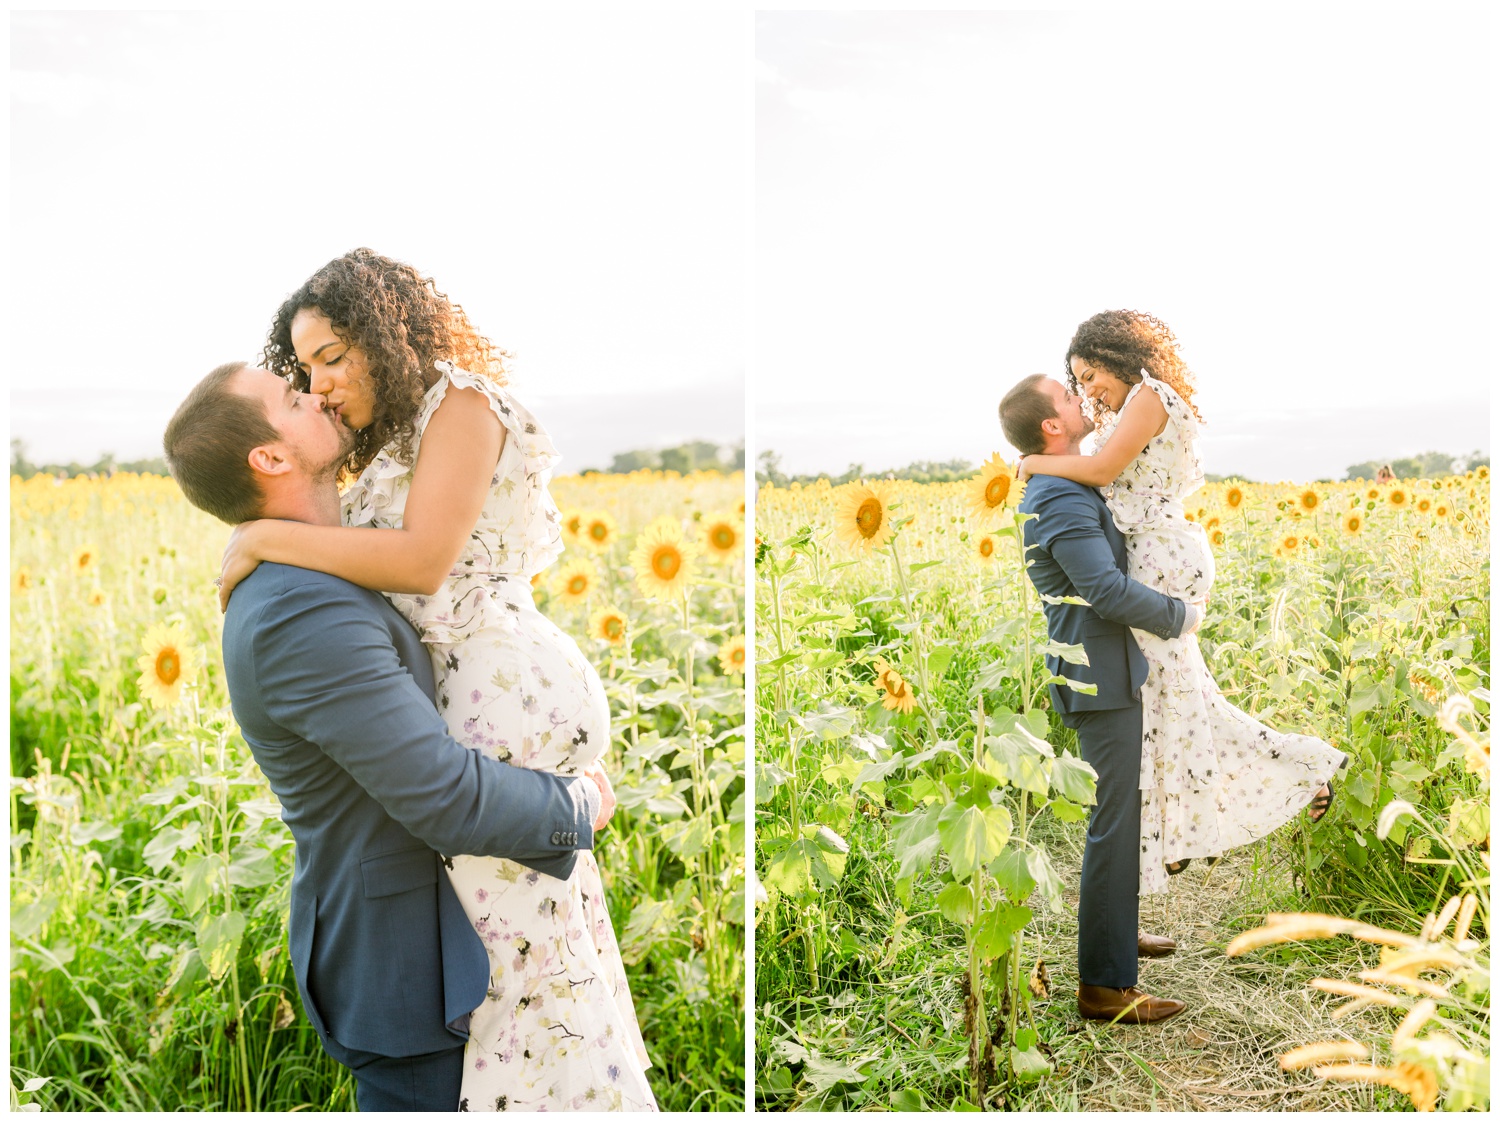 Engaged Couple in Sunflower Field at Cottell Park